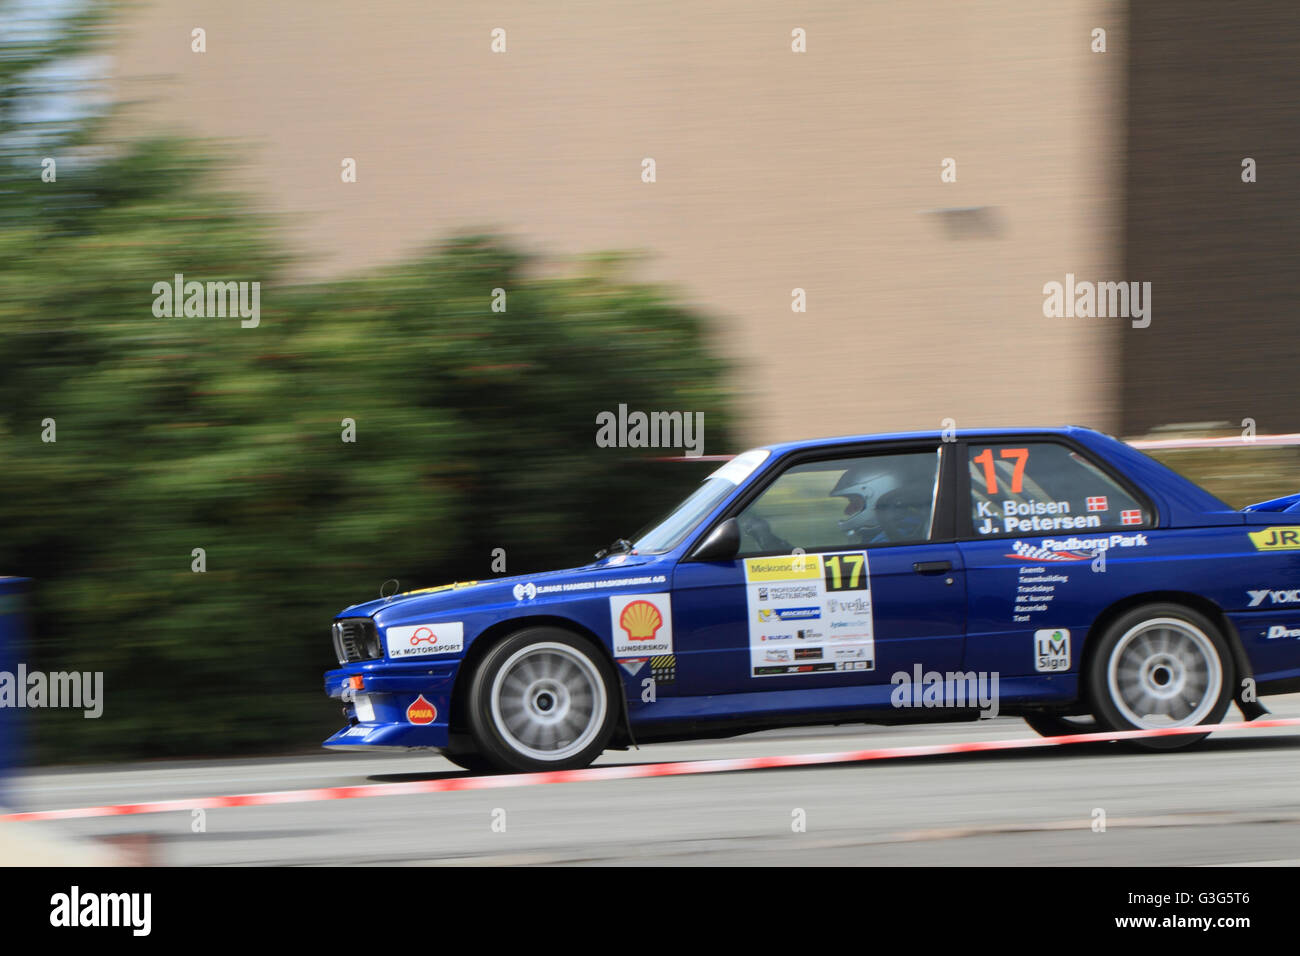 A Bmw M3 0 Being Raced At The Danish Rally Championships In Vejle Stock Photo Alamy